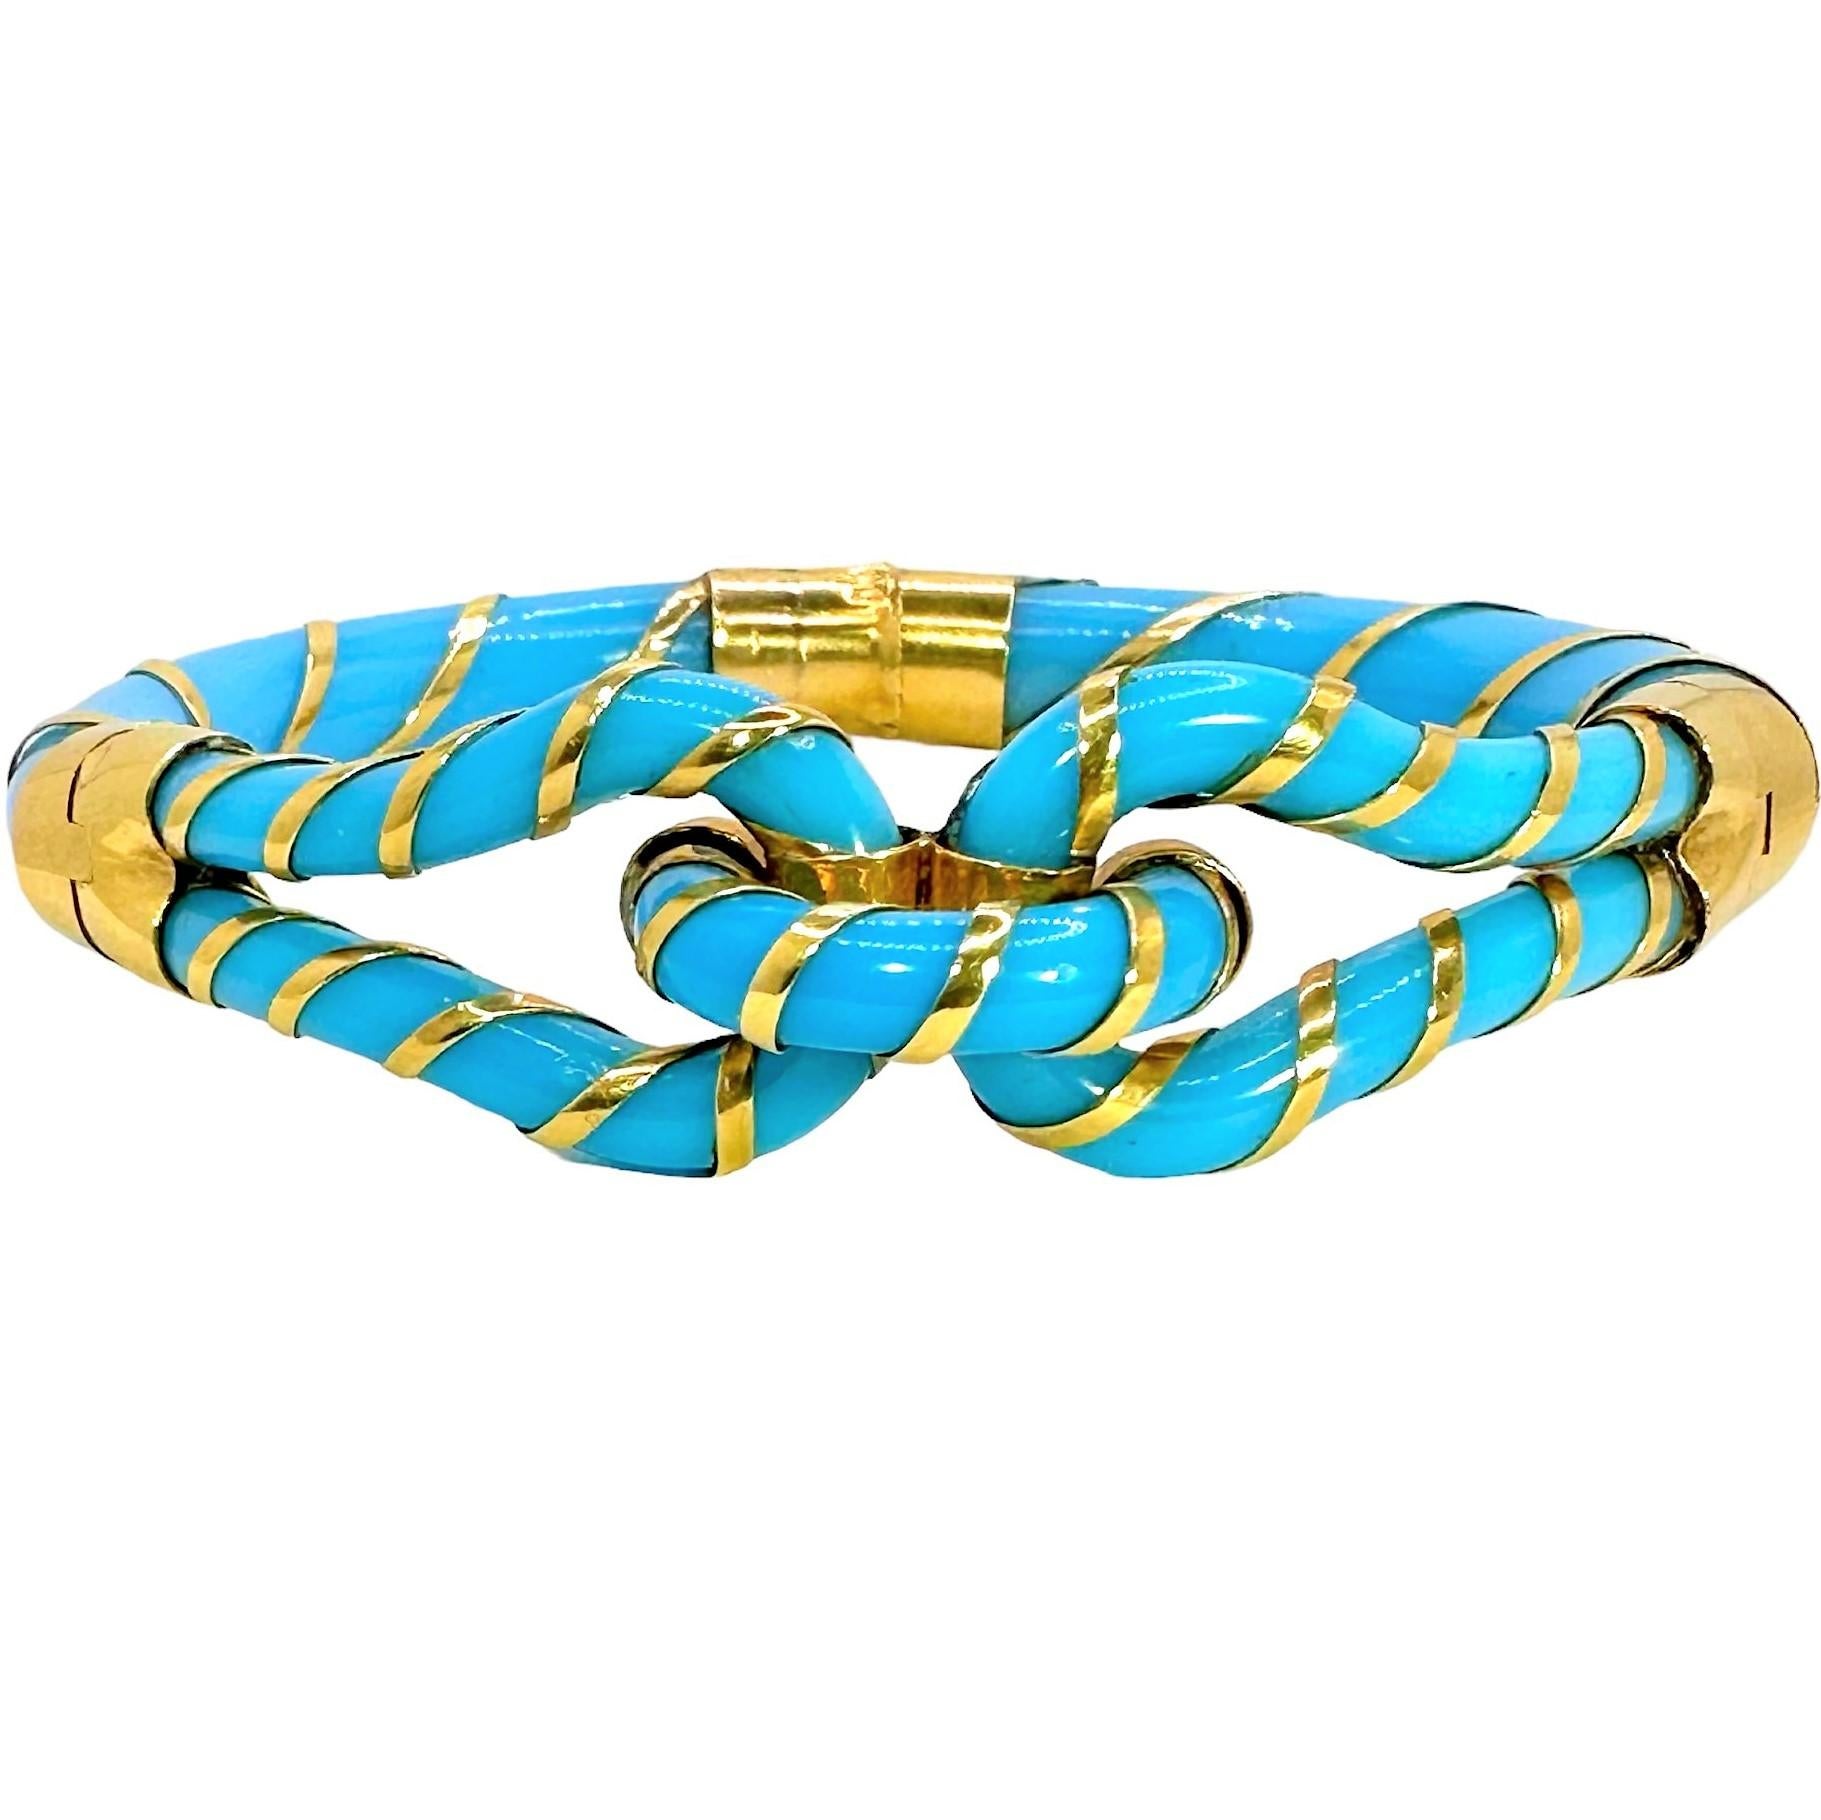 Imported into France in the early 20th century, this simple 18K bracelet features a knot design. The elegant use of the yellow gold, contrasts beautifully with the turquoise color, Venetian glass. The love knot joins two ends together, with a loop